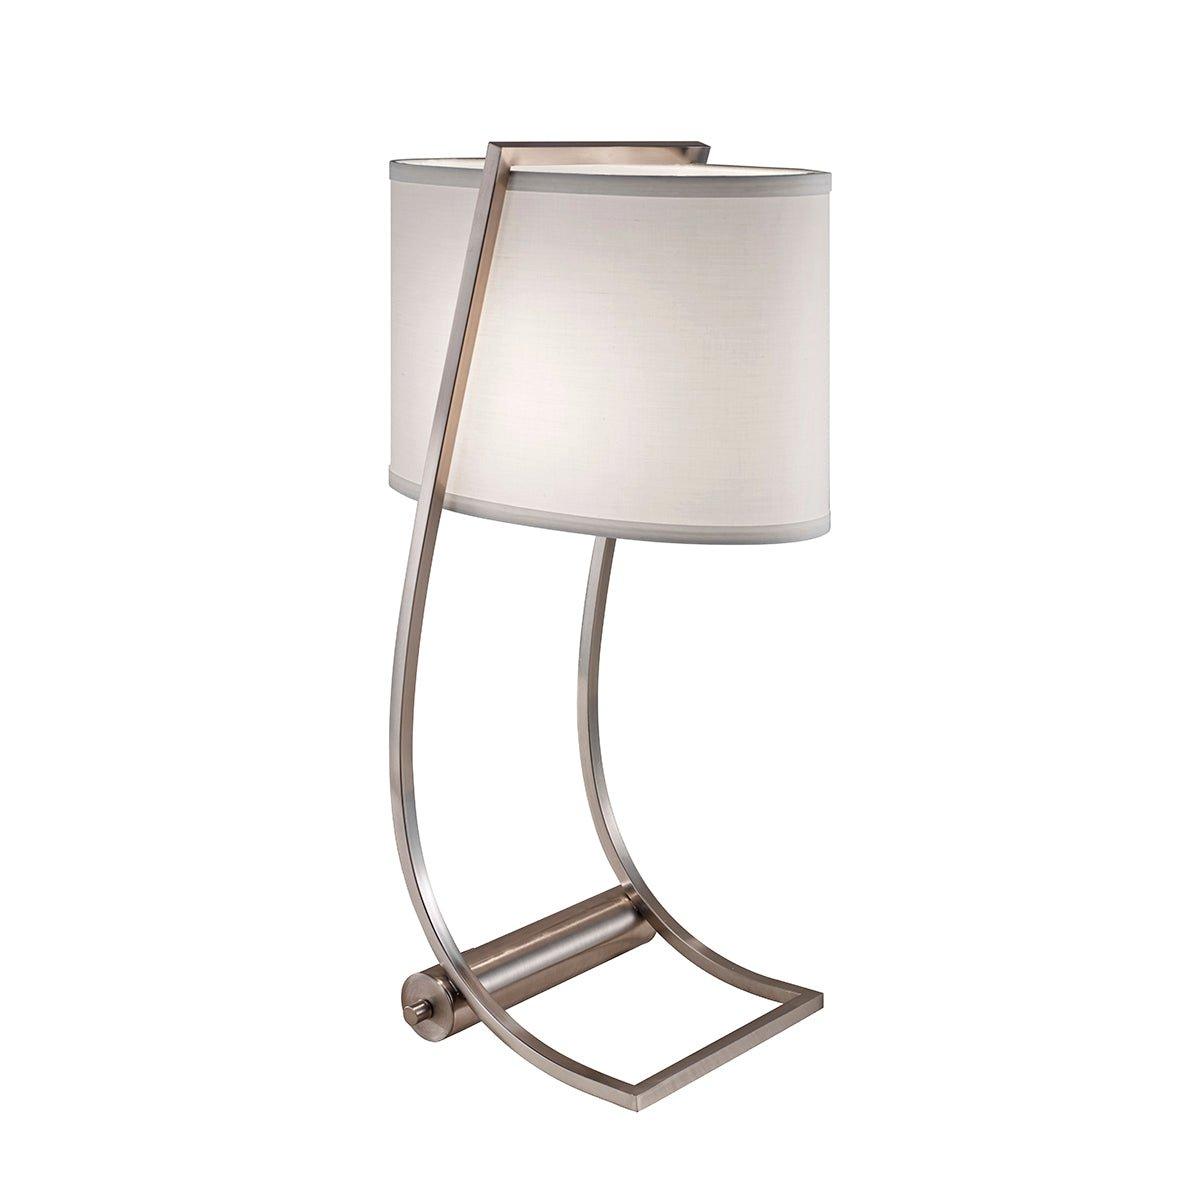 Table Lamp USB Port in Base White Cotton Fabric Shade Brushed Steel LED E27 60W